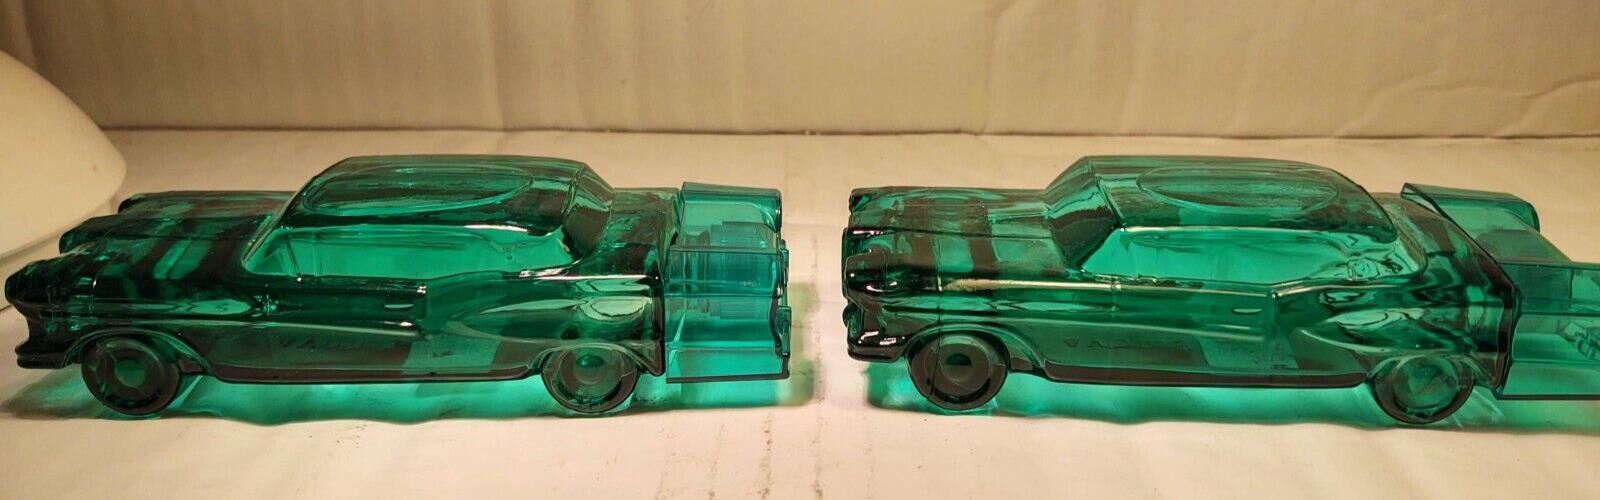 LOT OF 2 AVON MENS AFTERSHAVE GREEN FORD EDSEL 1995